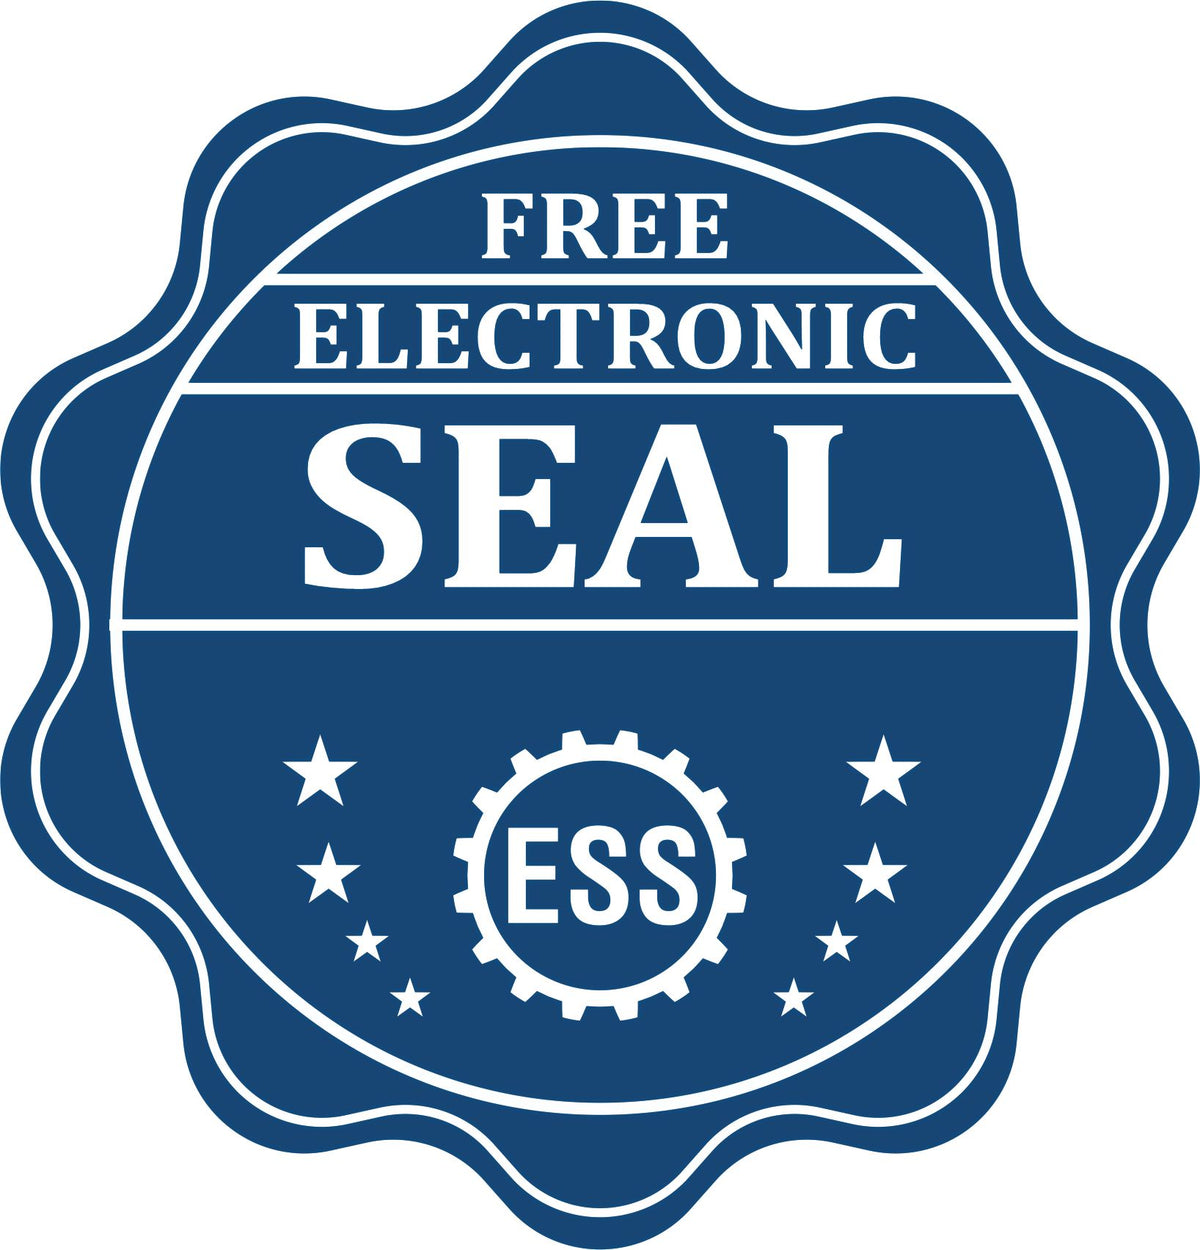 A badge showing a free electronic seal for the PSI Washington Notary Stamp with stars and the ESS gear on the emblem.